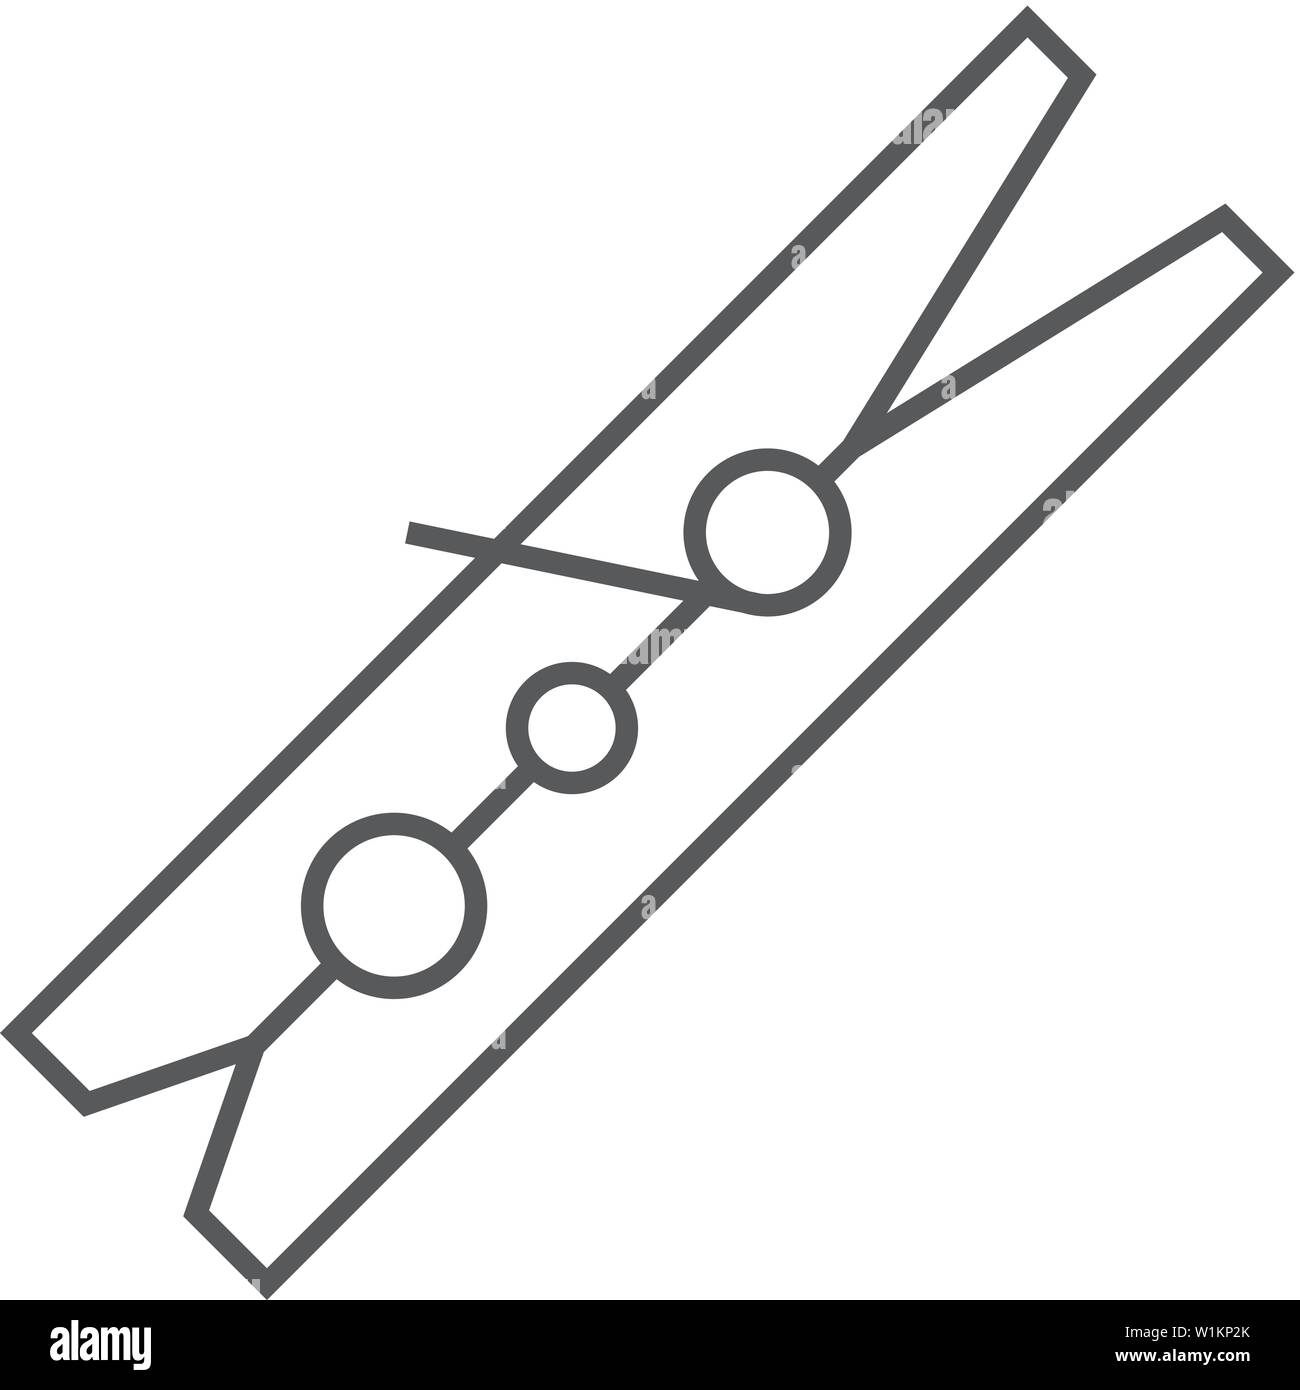 Clothes peg icon in thin outline style. Clothes pin clamp Stock